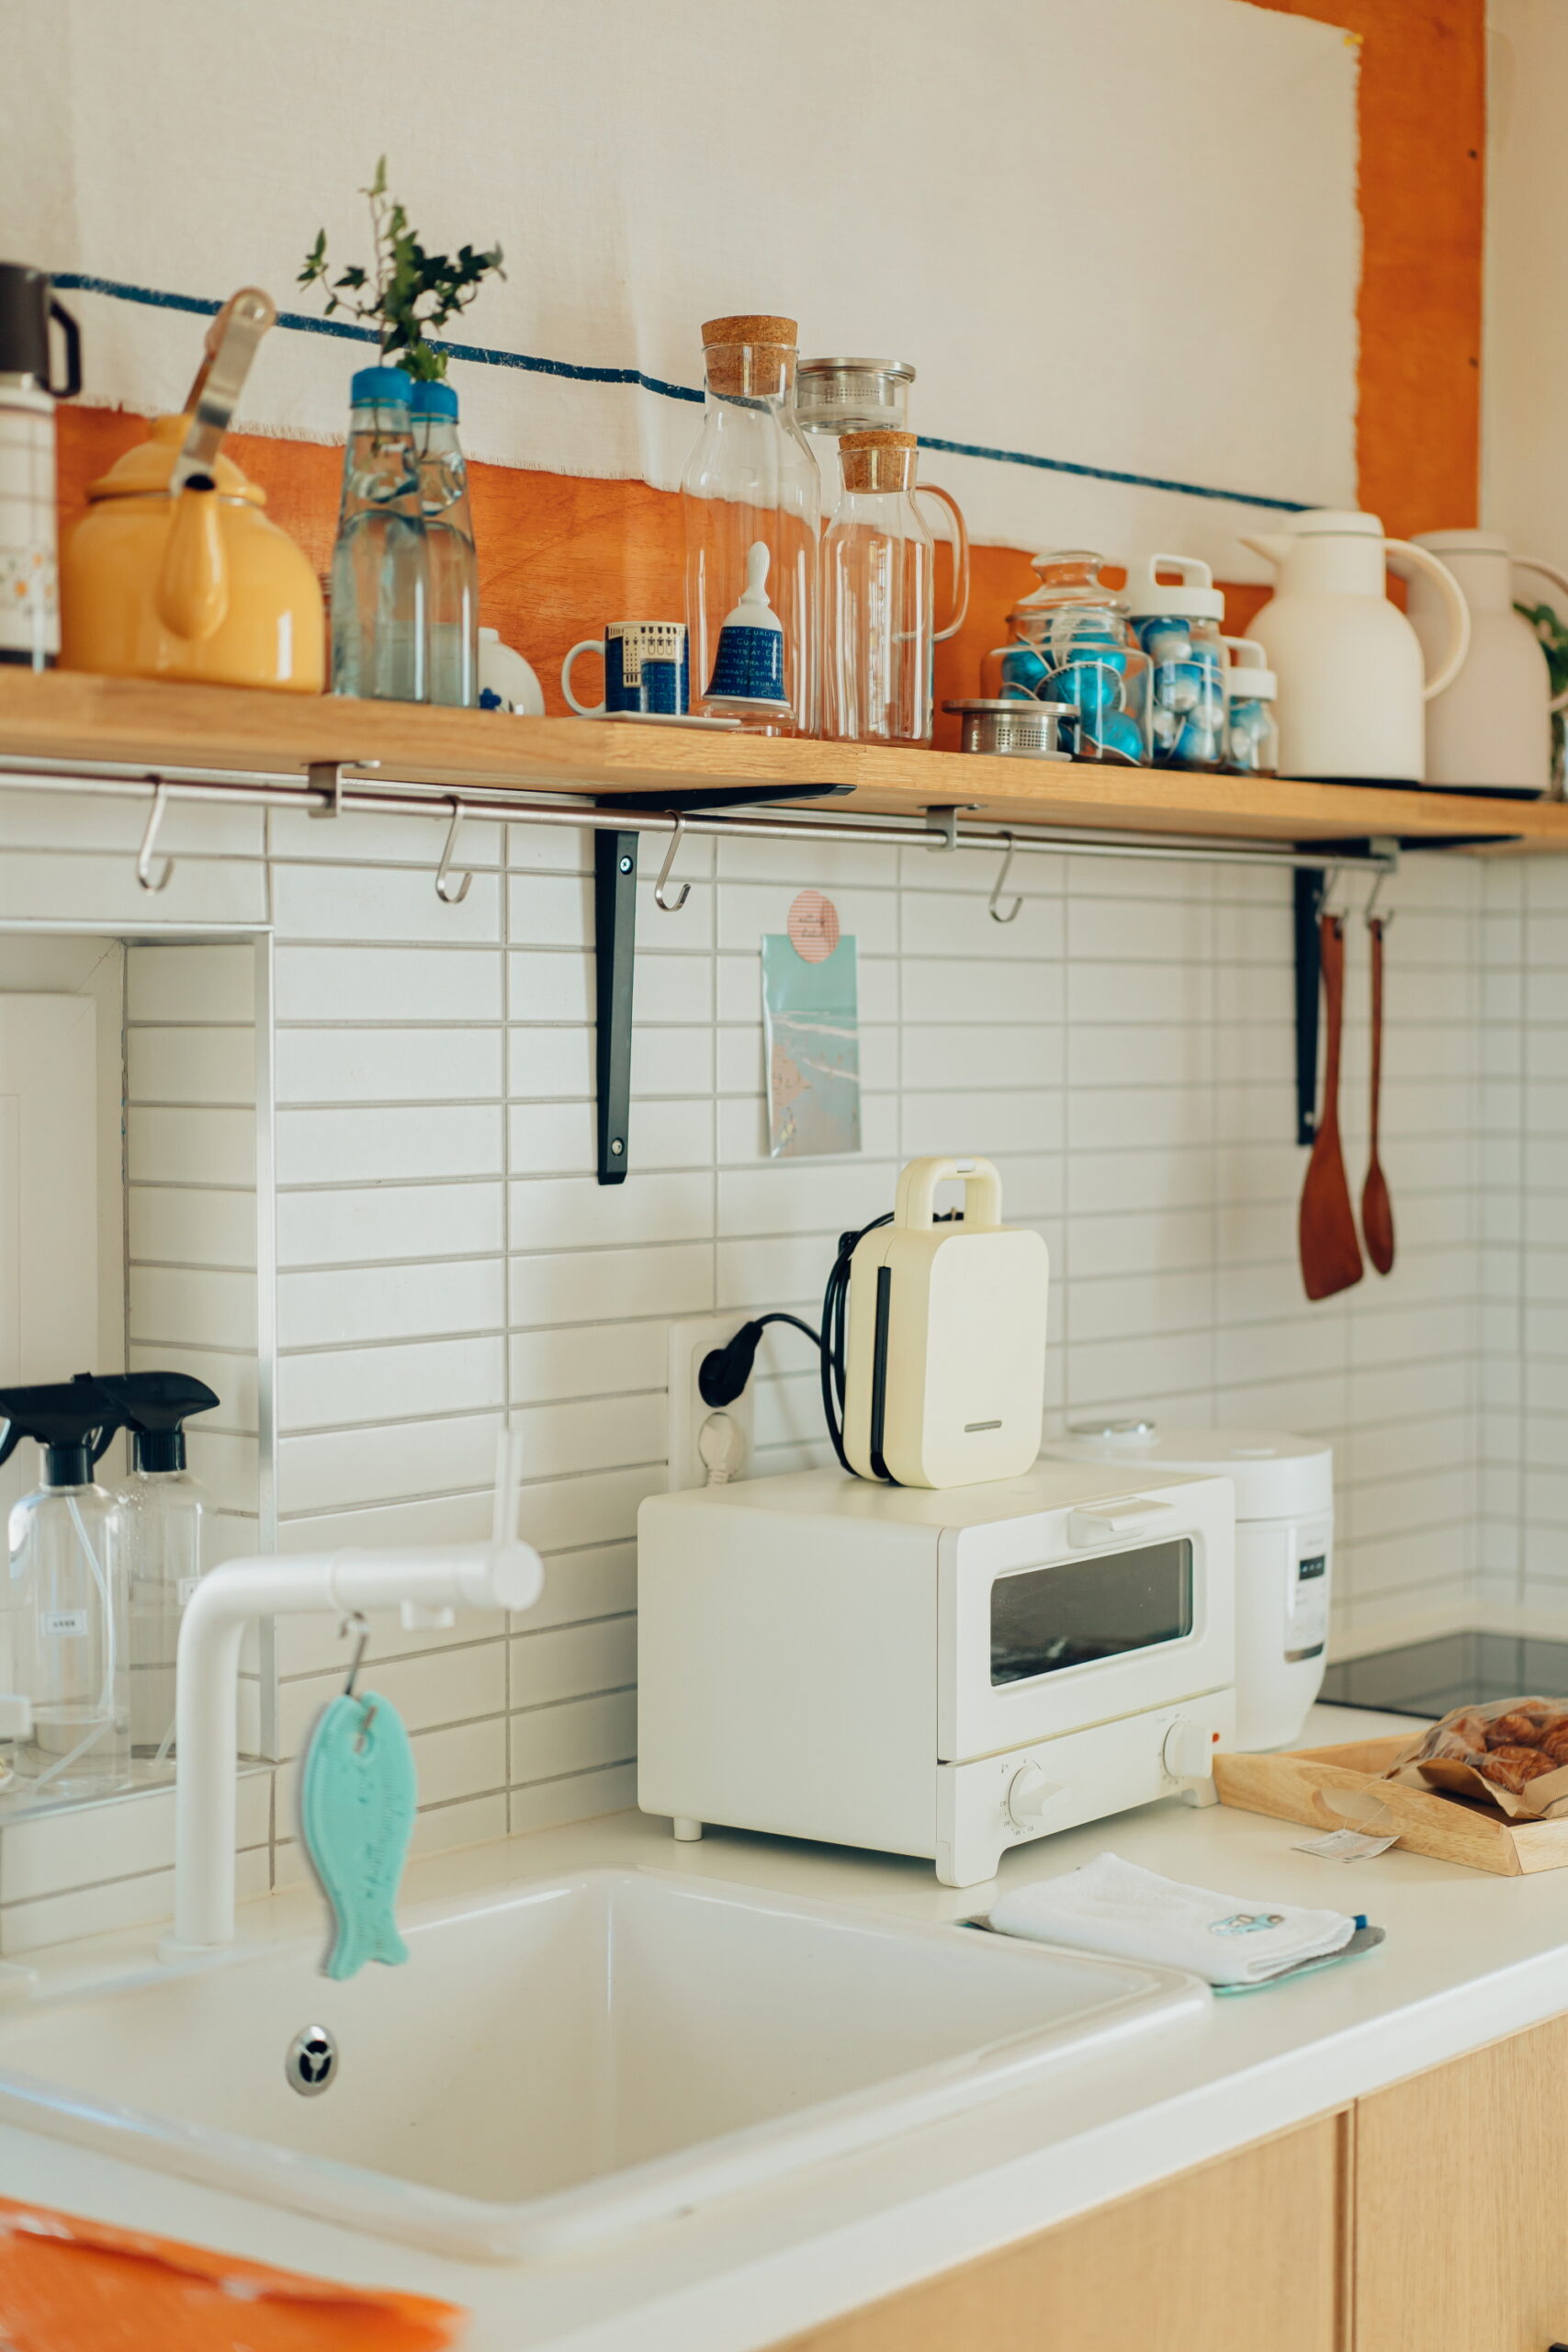 Optimize small kitchens with open shelving above the kitchen sink